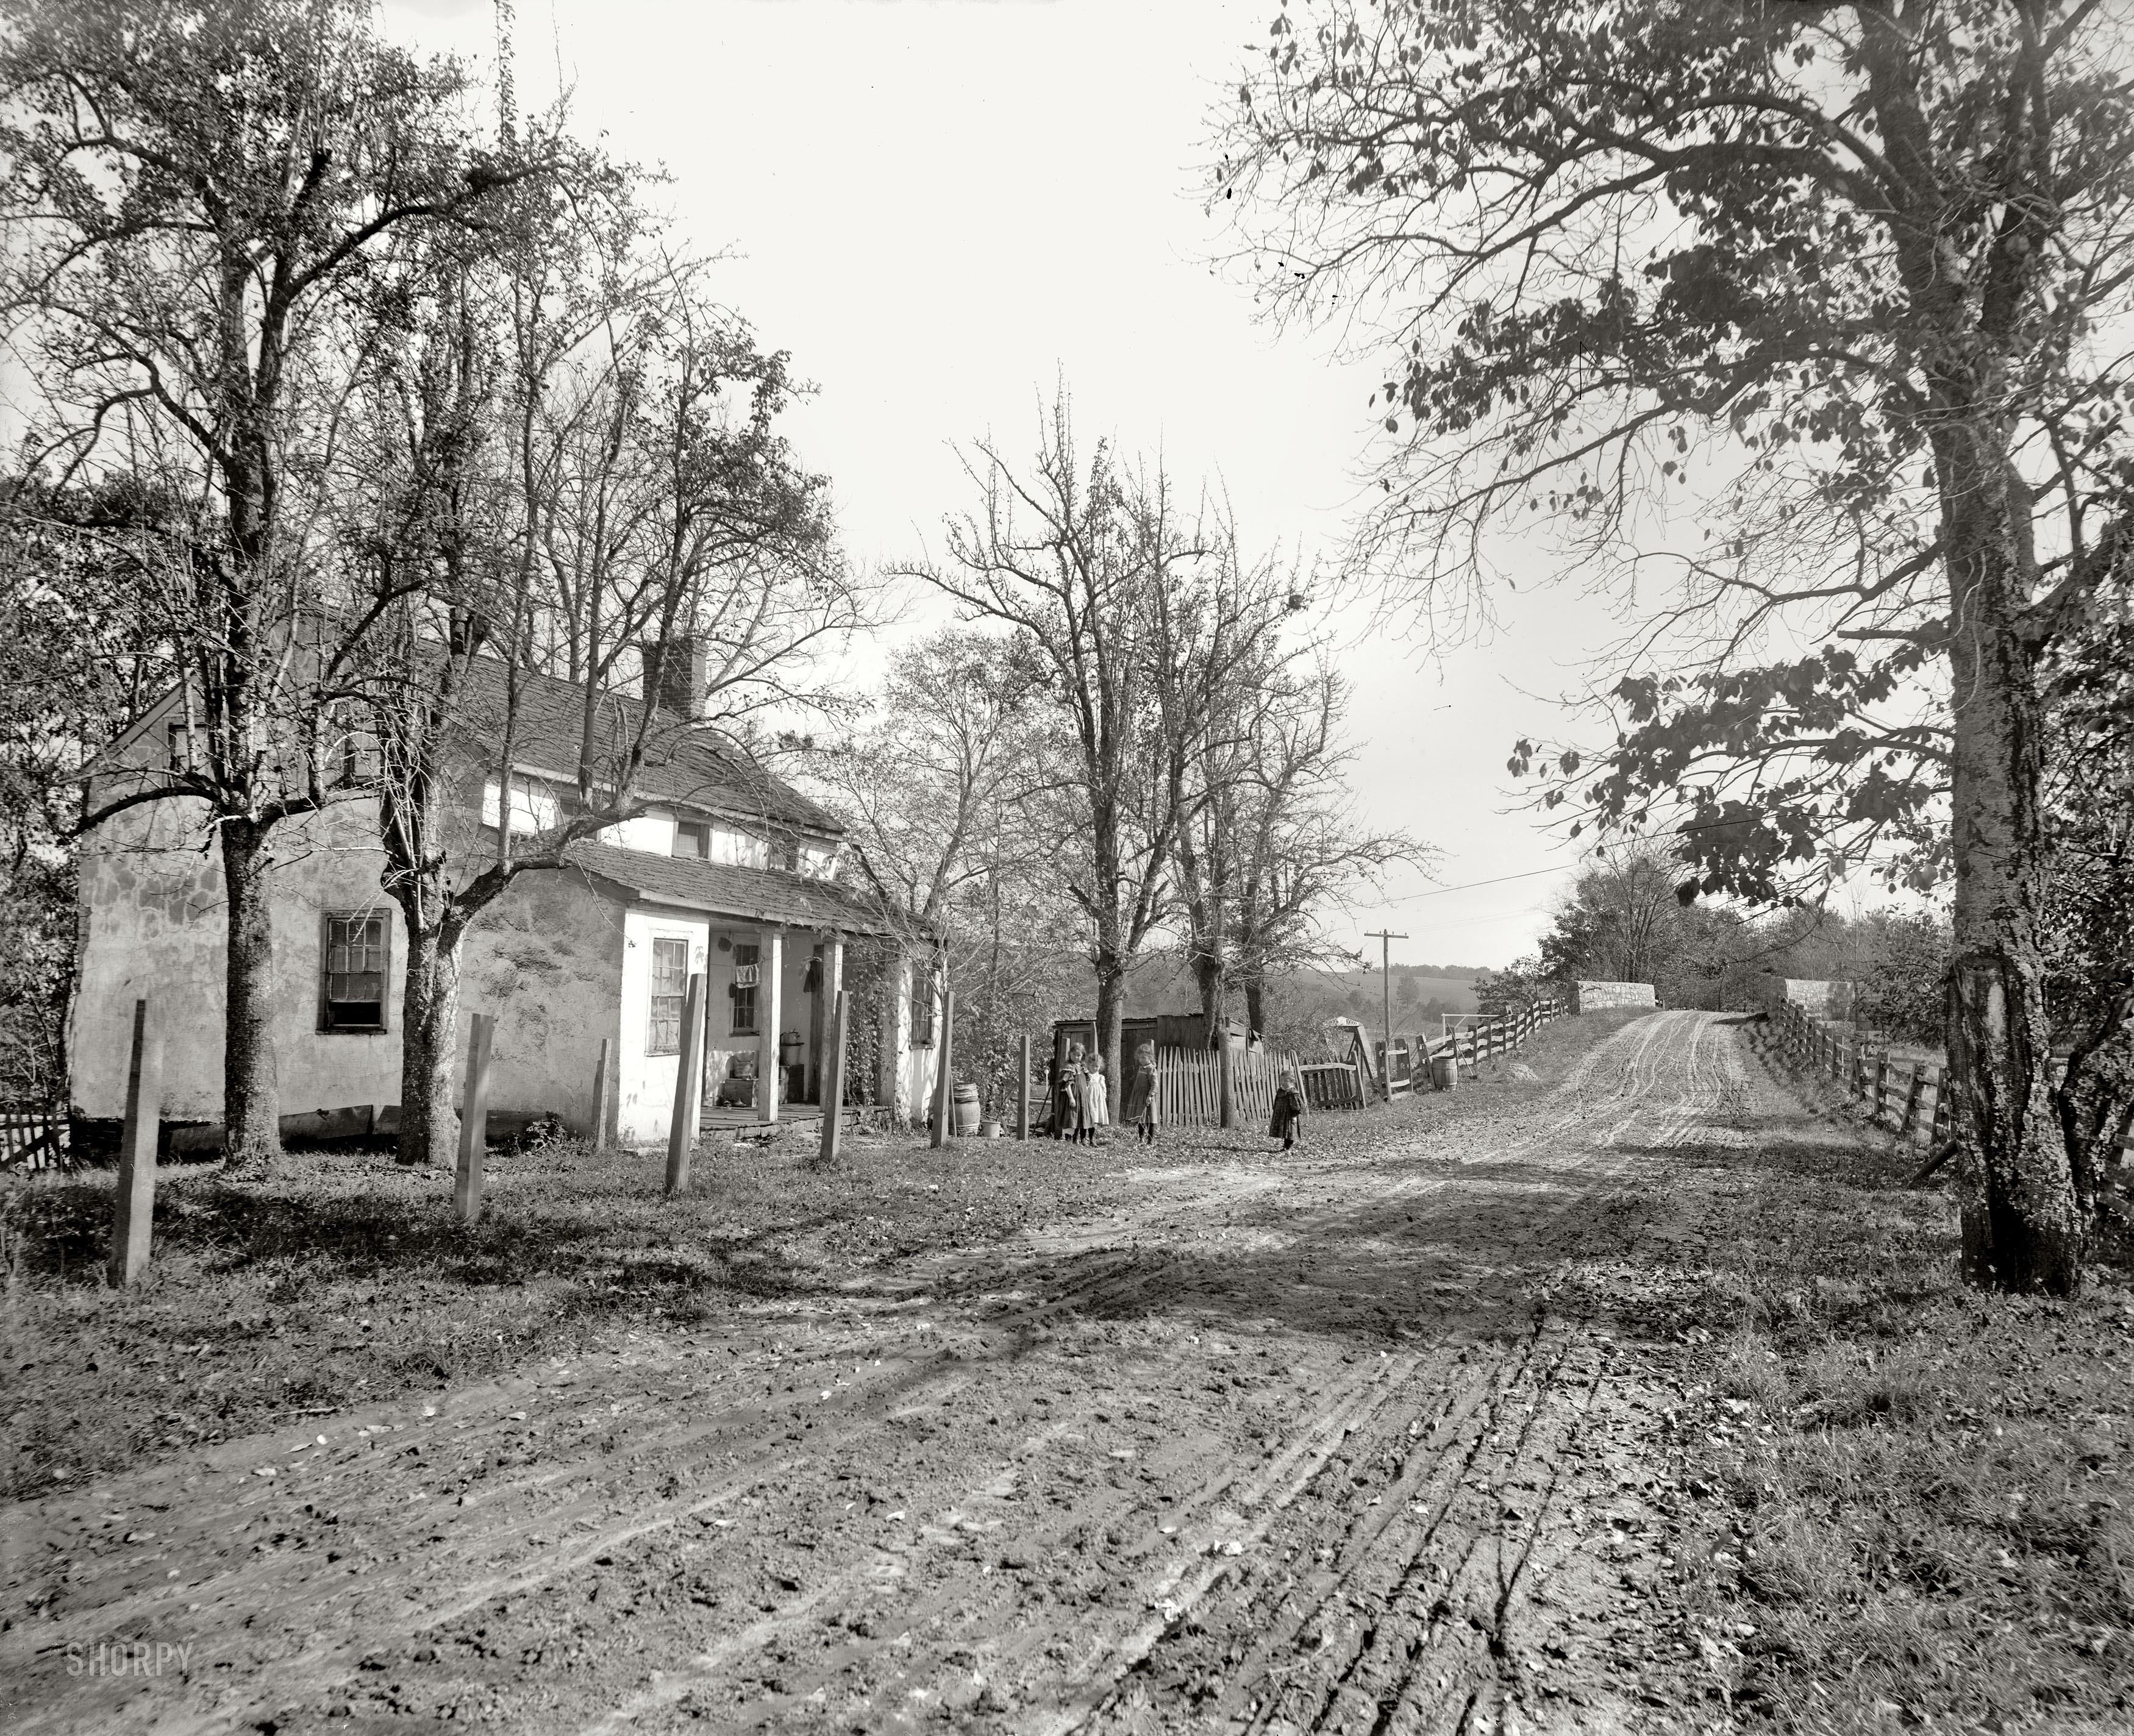 Far Hills, New Jersey, circa 1900. "Old country road." Probably not in Google Street View. (Update: How wrong I was!) Detroit Publishing Co. View full size.